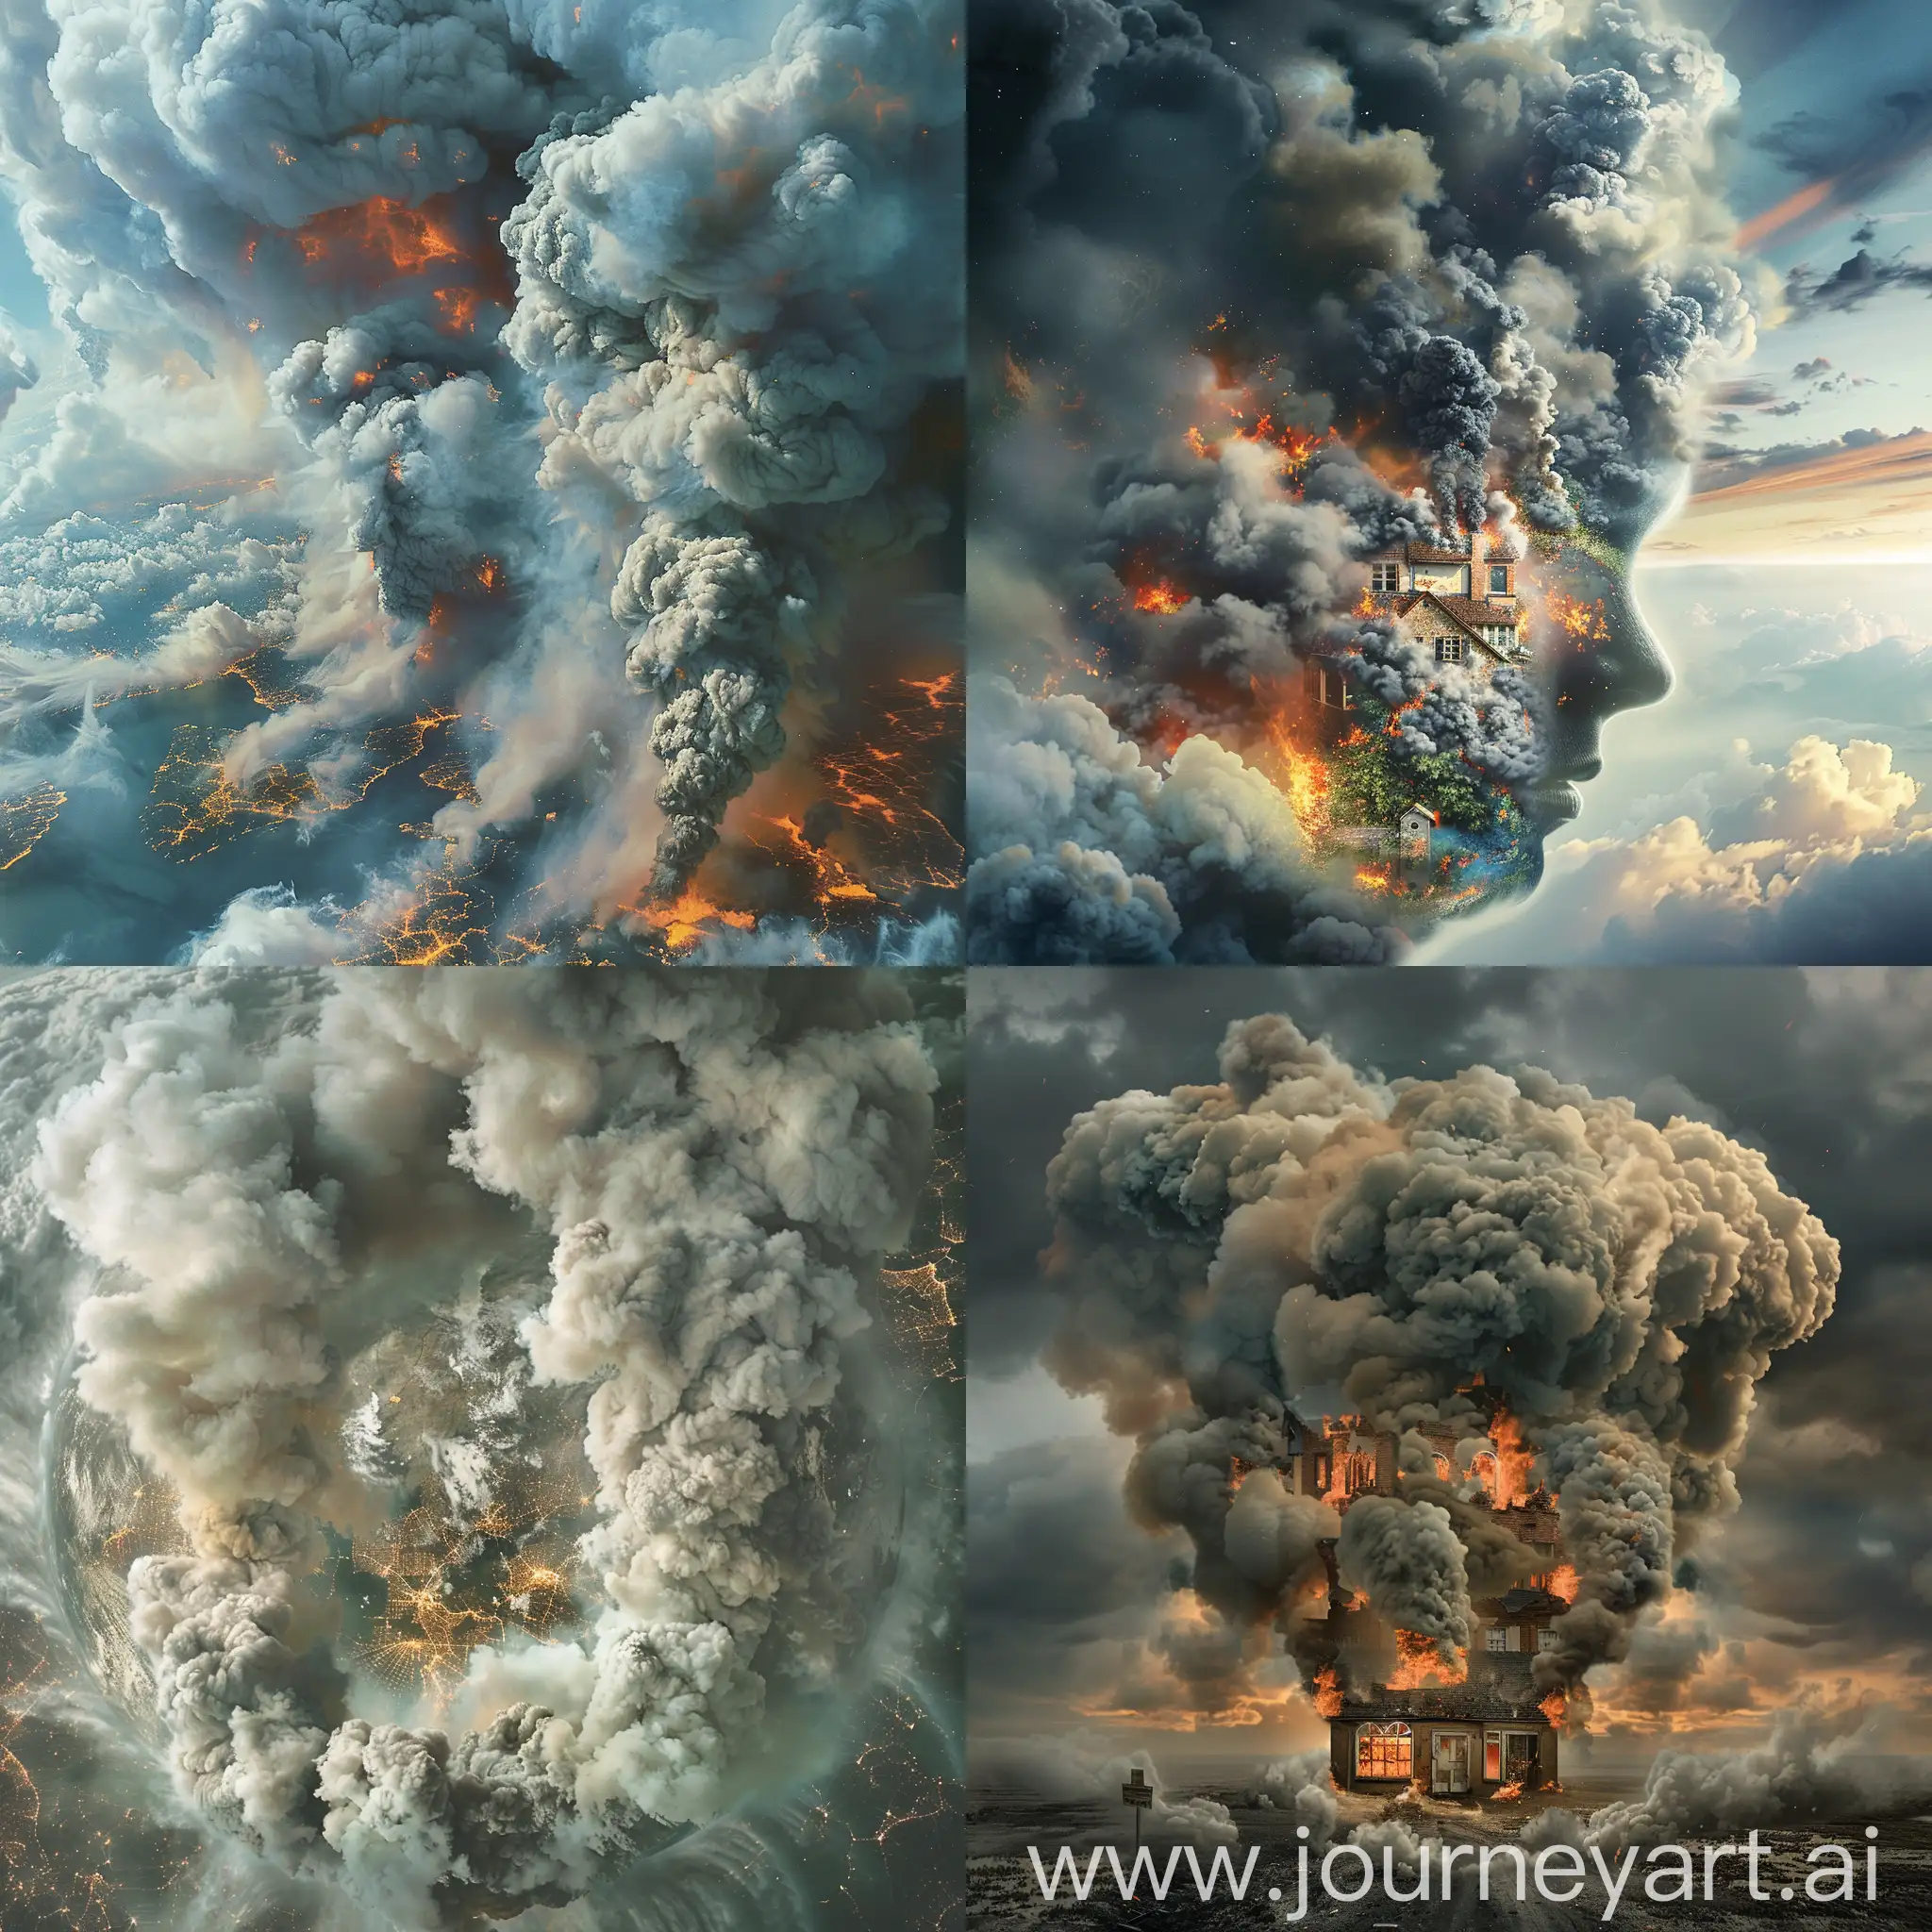 "The appearance of smoke filling the entire sky and earth, turning the surroundings into what seems like a burning house. This imagery signifies extreme destruction and chaos, with smoke entering through every human inlet – the nostrils, ears, eyes, and ears."